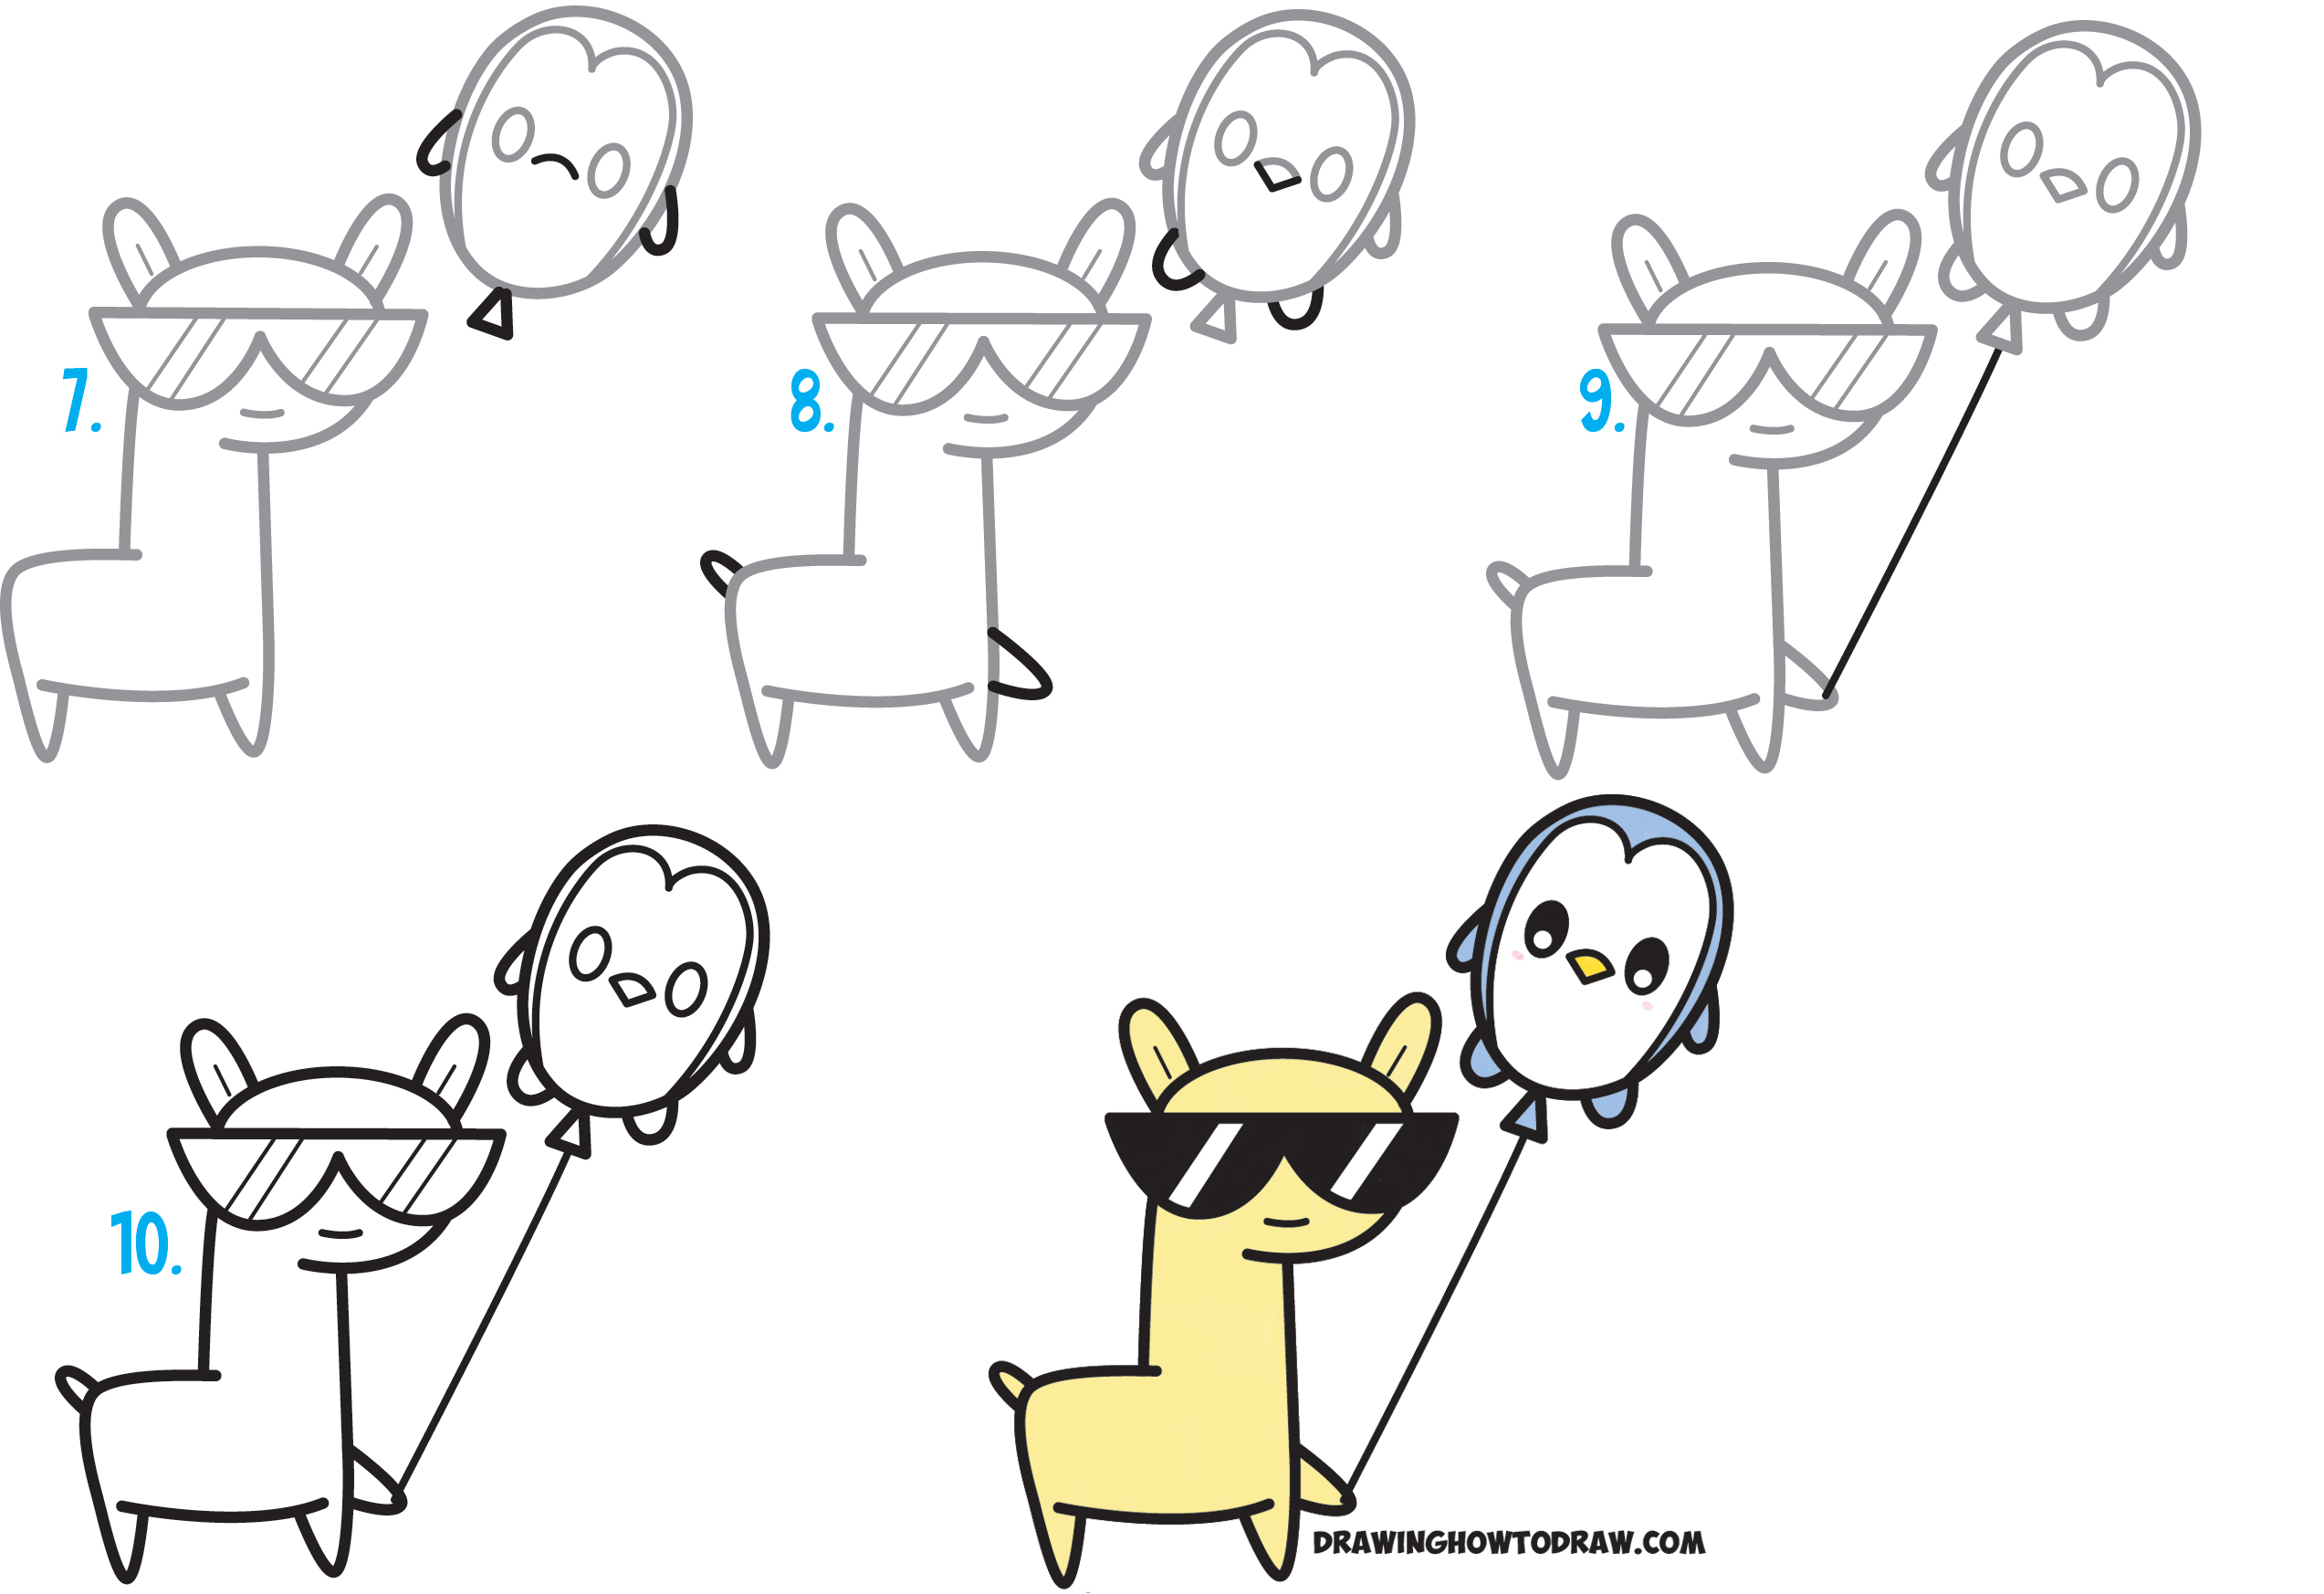 Learn How to Draw Cute Kawaii / Chibi Llama with Sunglasses Holding Cartoon Penguin Balloon Simple Steps Drawing Lesson for Children